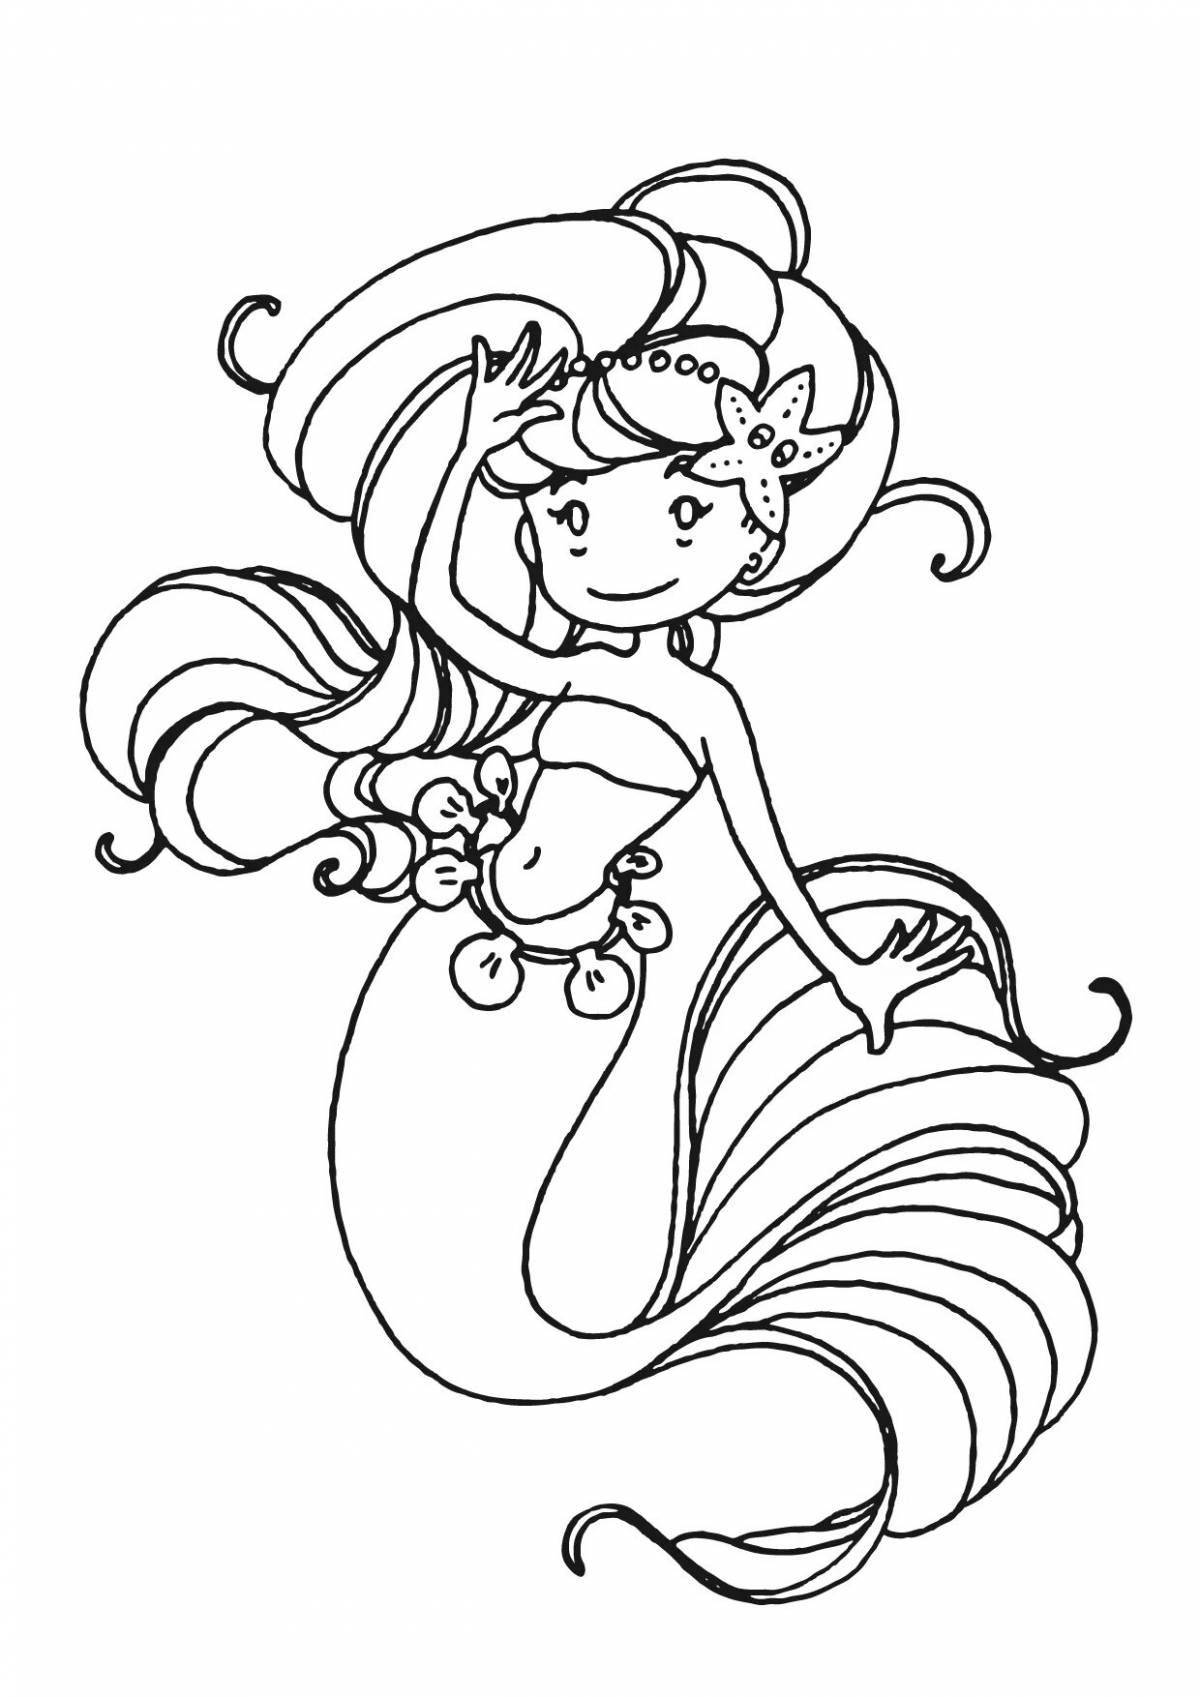 Amazing siren head coloring page for kids